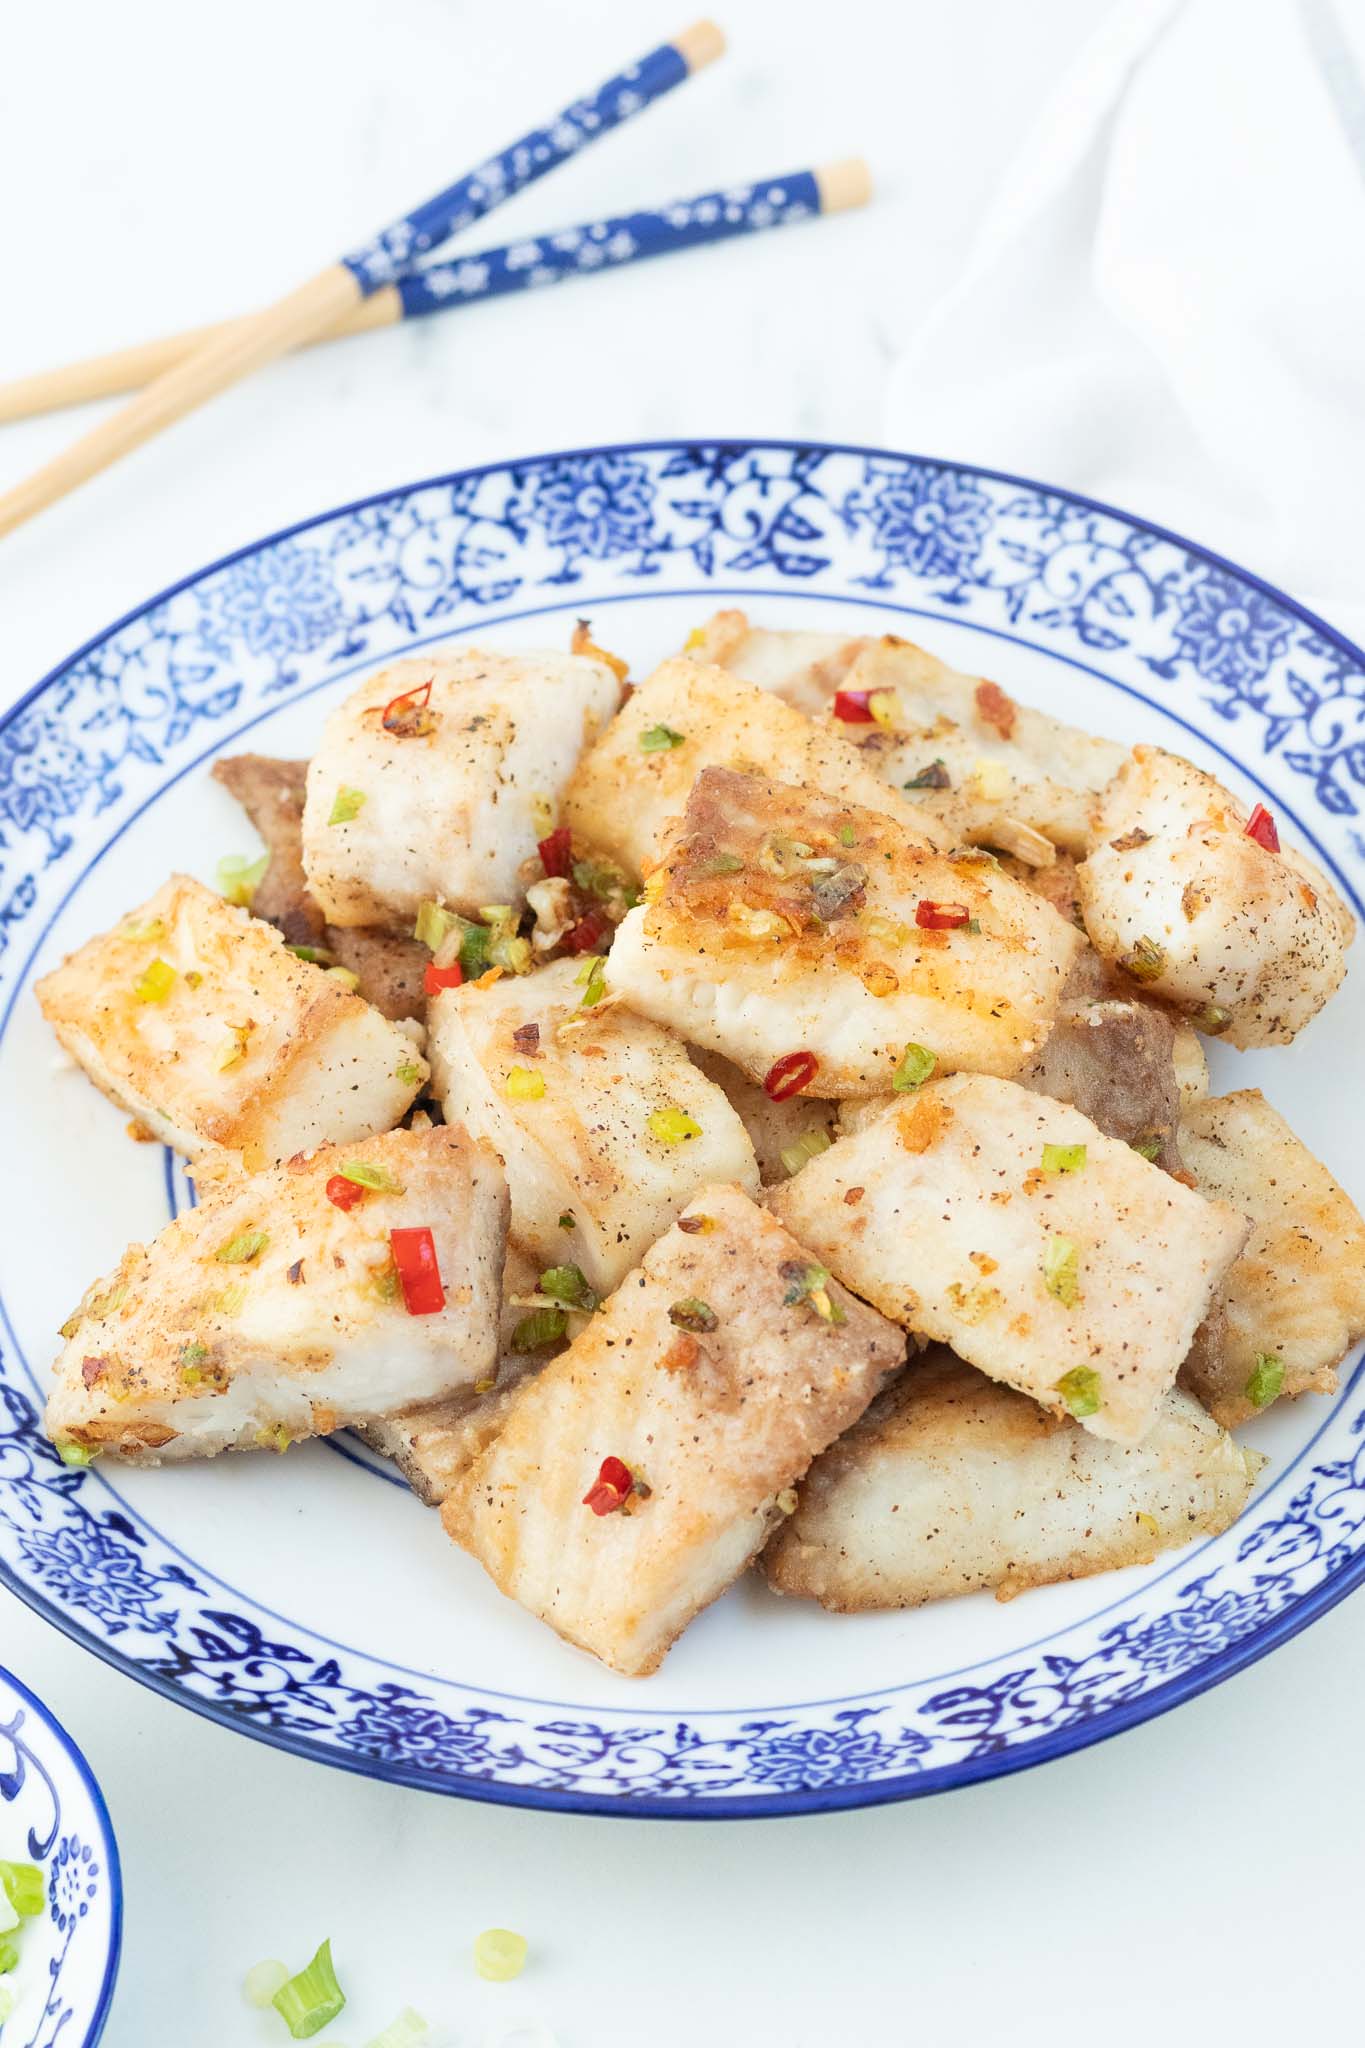 Chinese Salt and Pepper Fried Fish Fillet - BEYOND THE NOMS